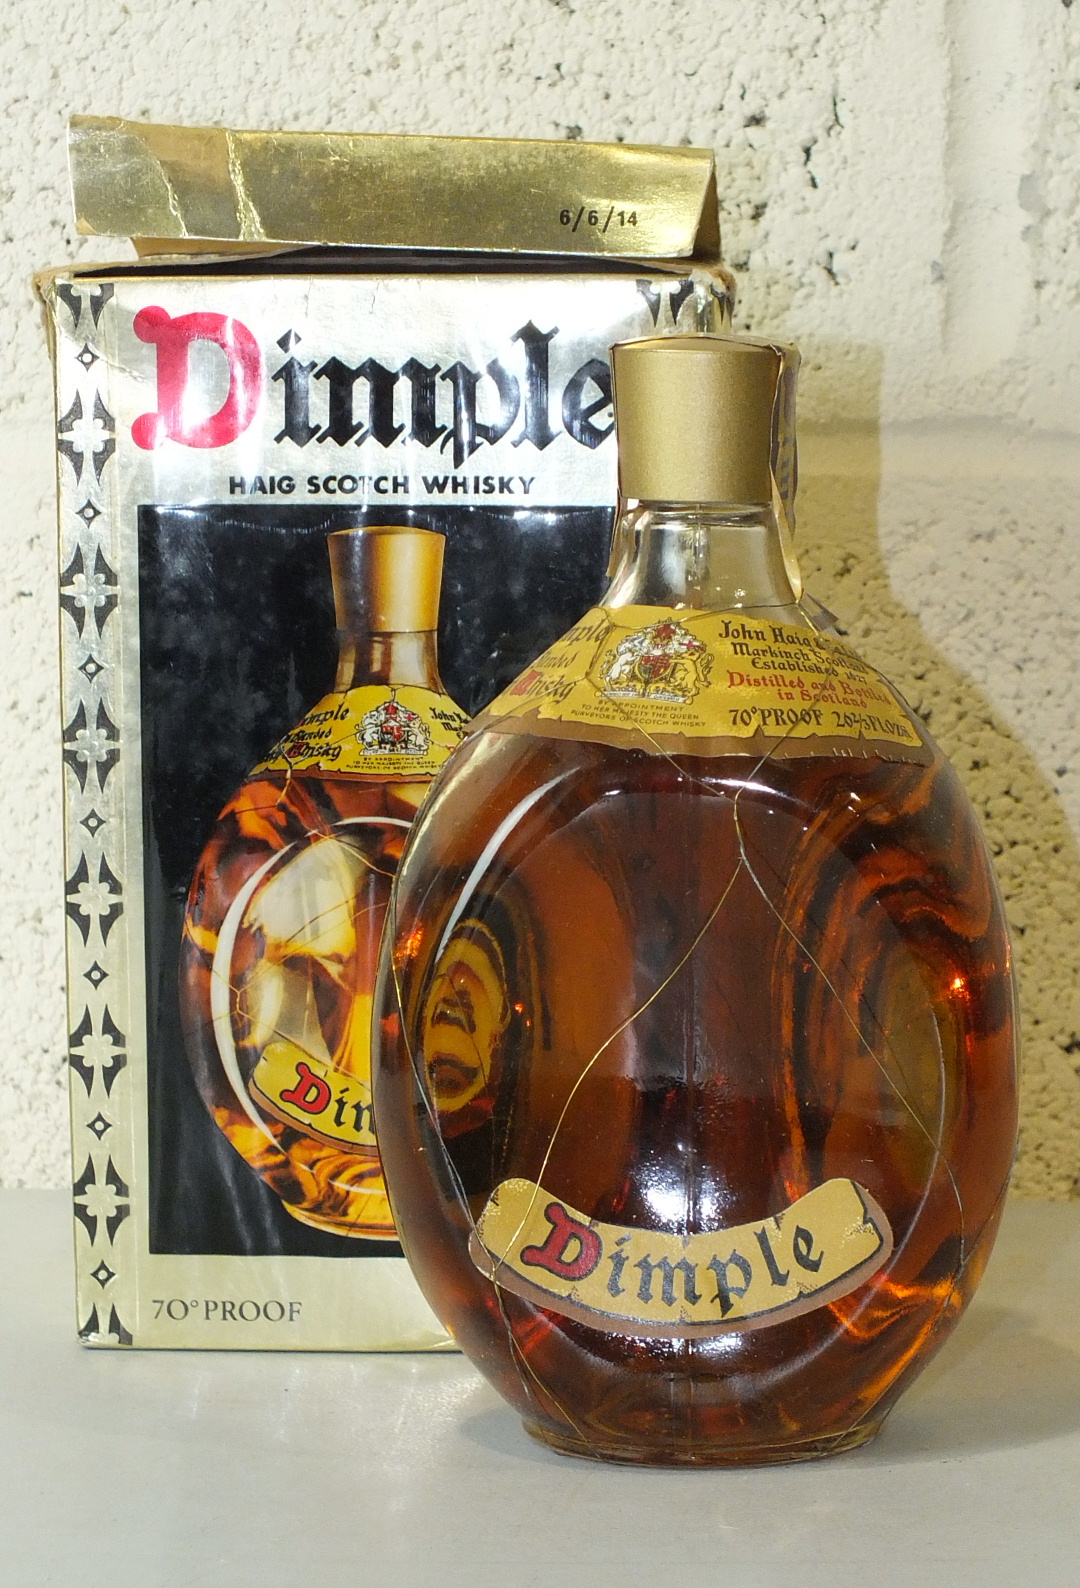 John Haig & Co. Dimple Whisky, 26 2/3 fl.oz., 70% vol, with plastic cap and wire, one bottle in box,